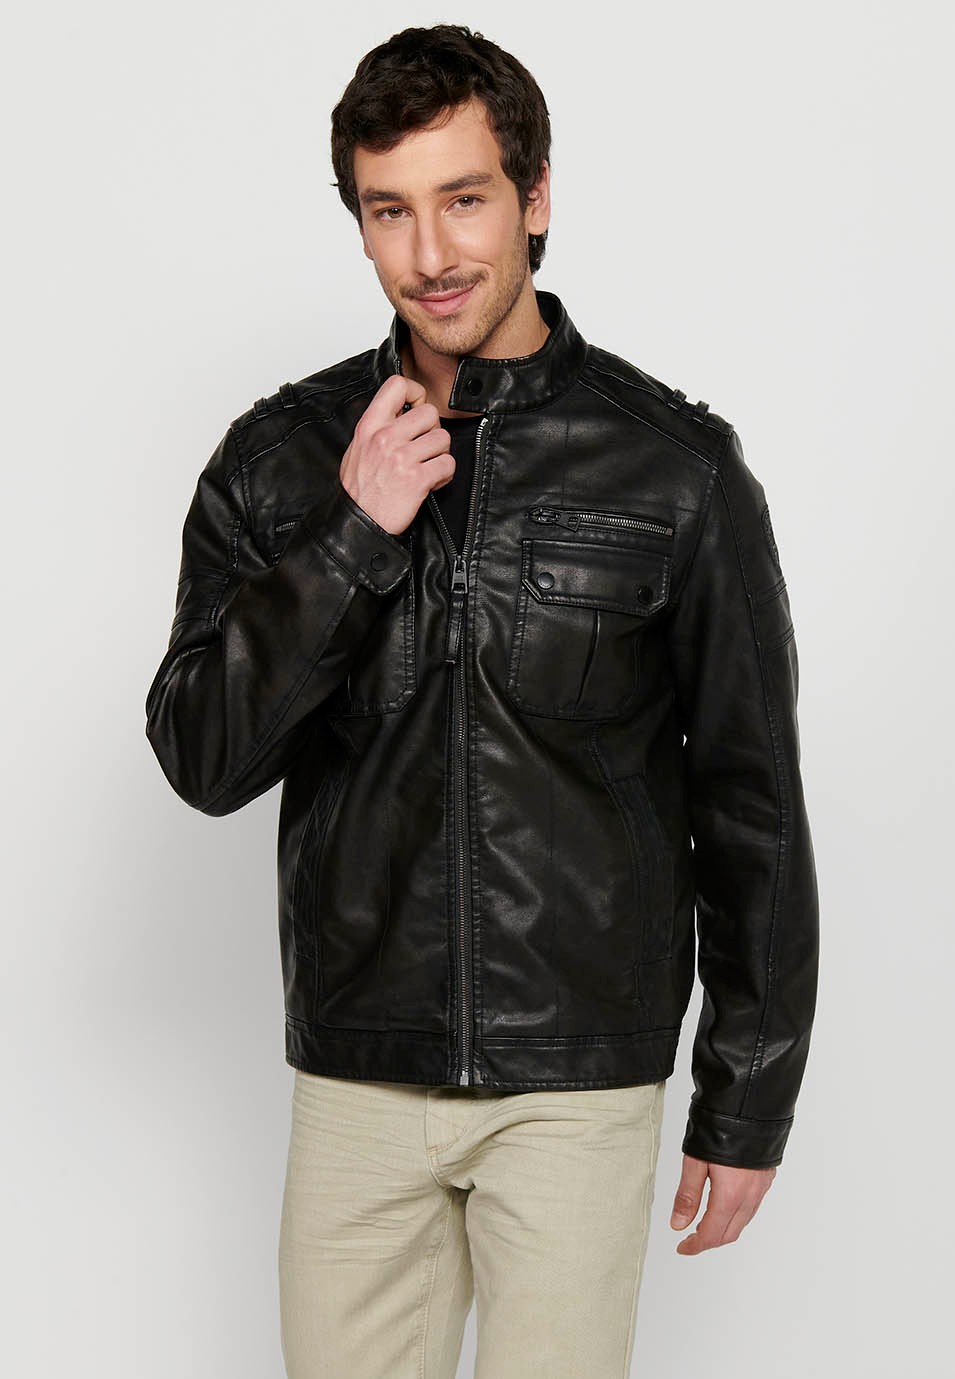 Dark Brown Leather Effect Jacket with Front Zipper Closure and Round Neck for Men